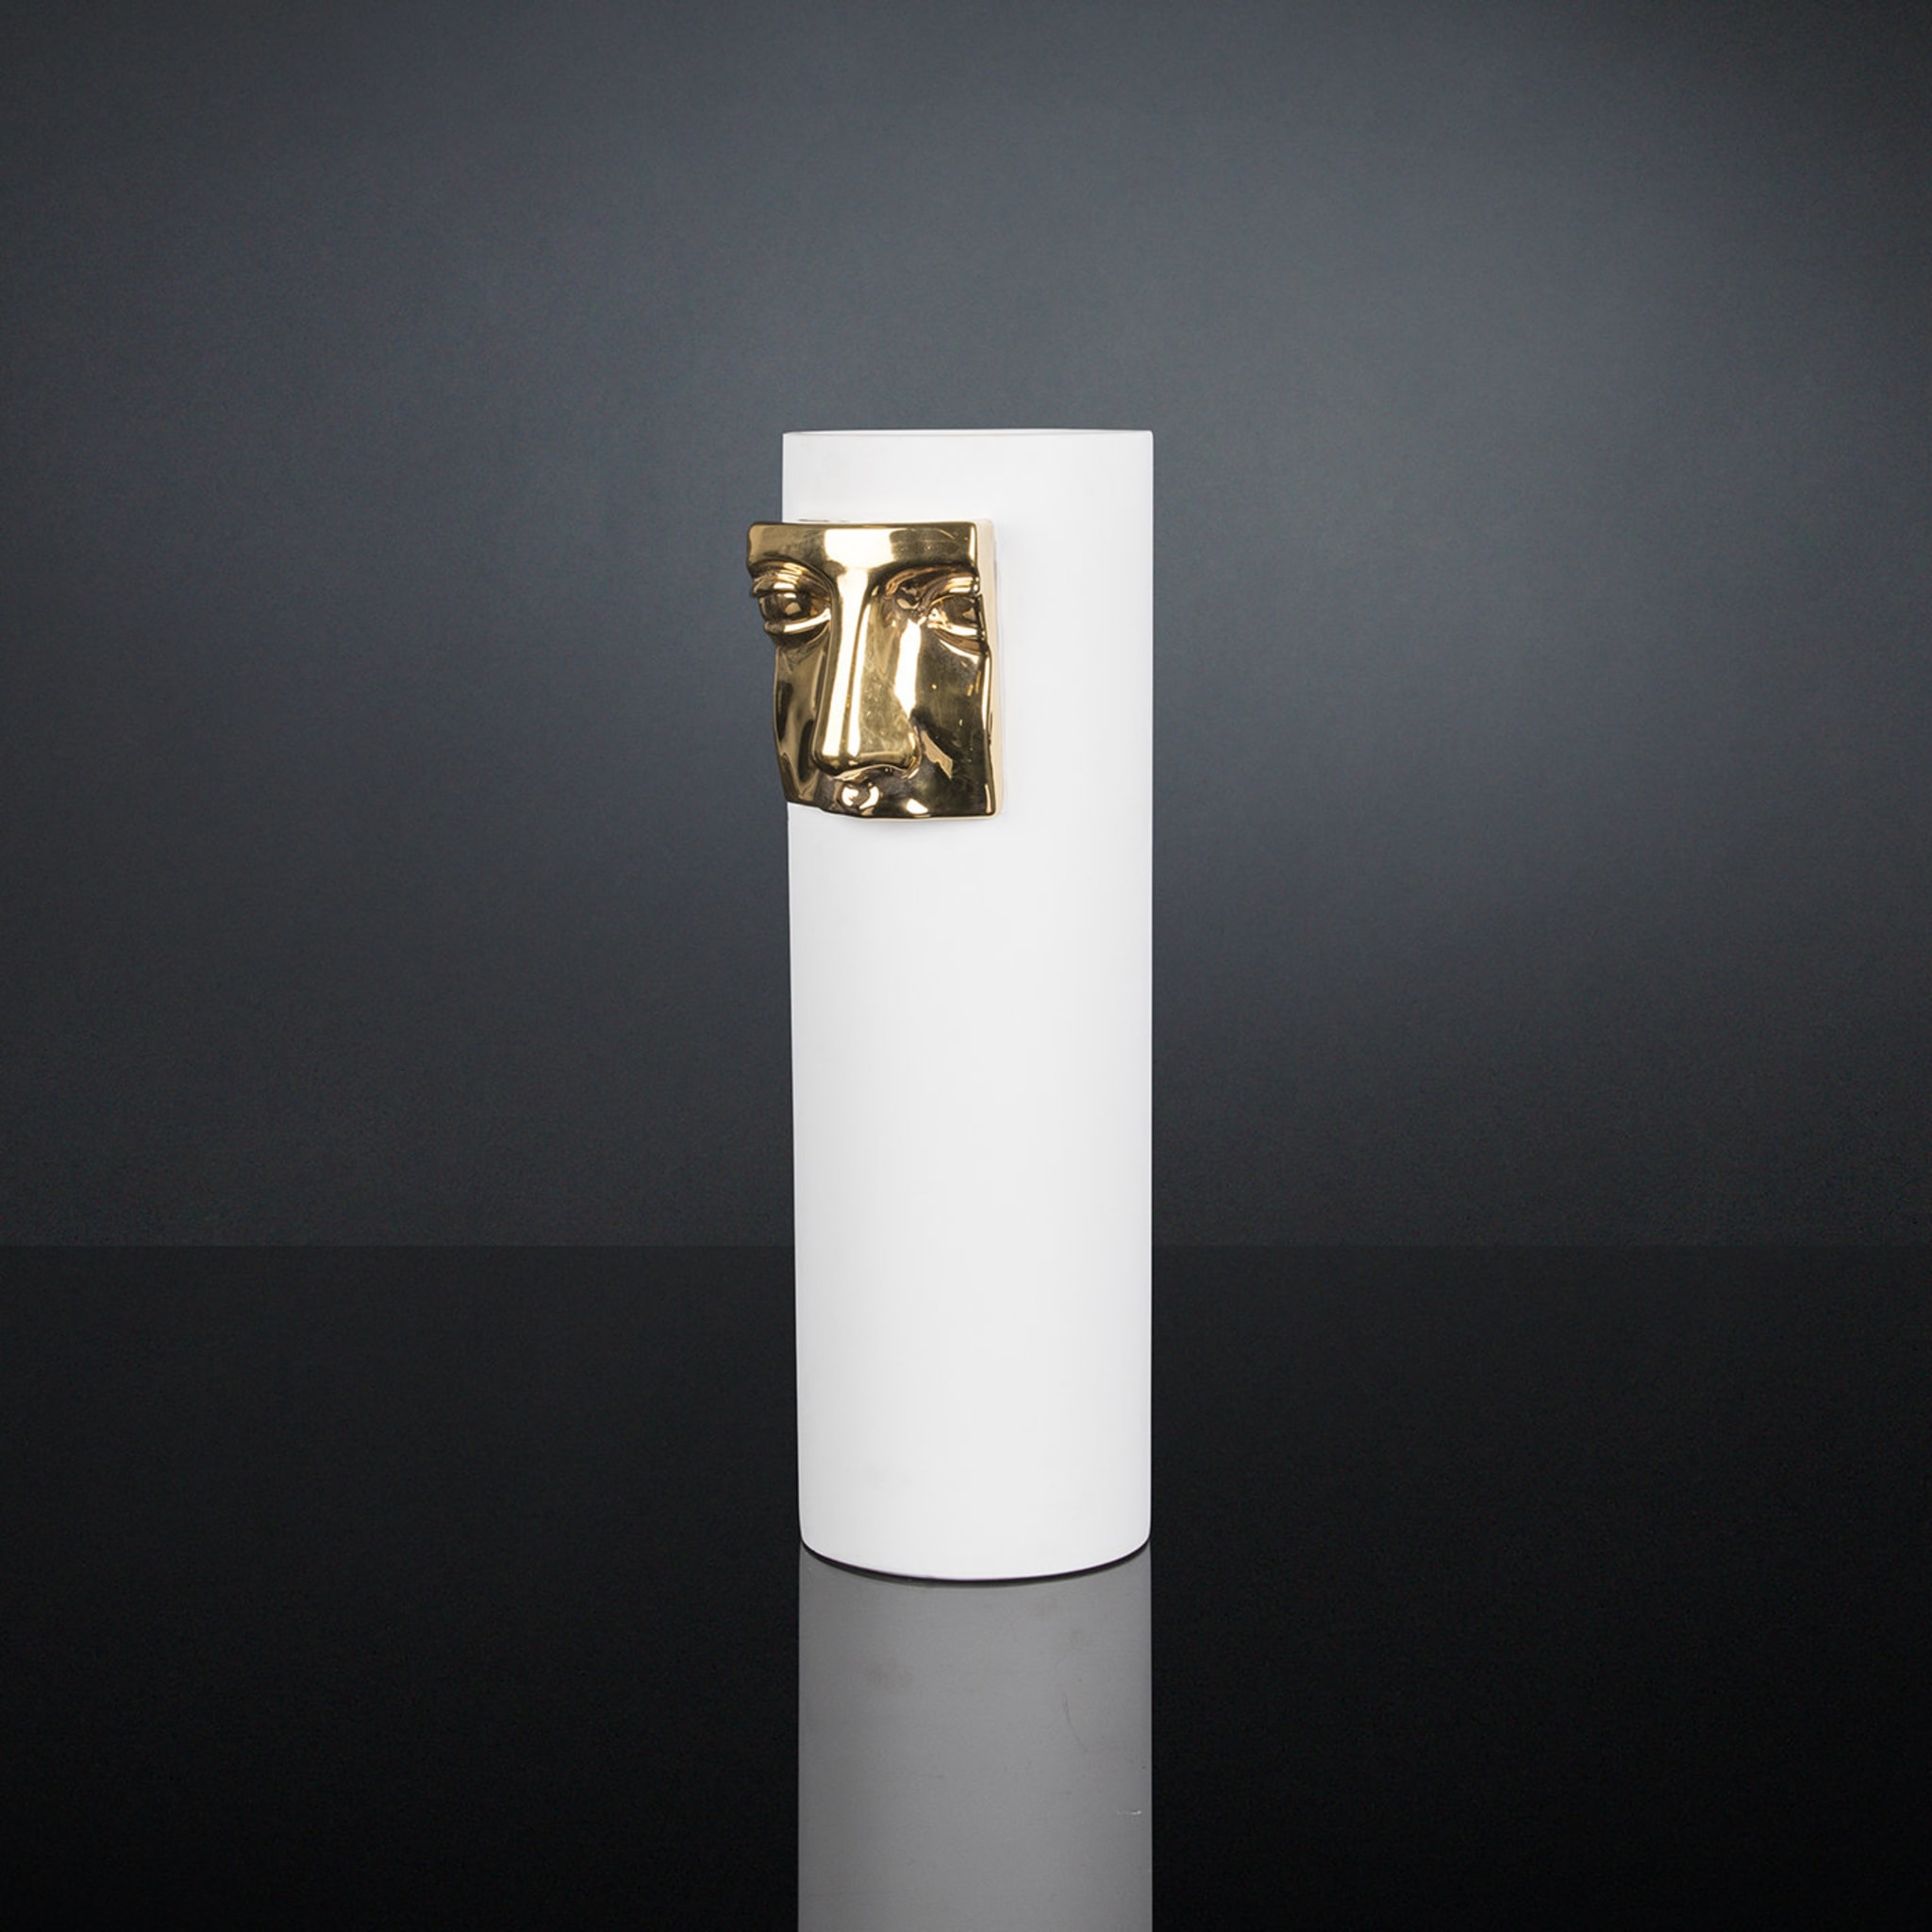 Juno's Nose White and Gold Vase - Alternative view 1